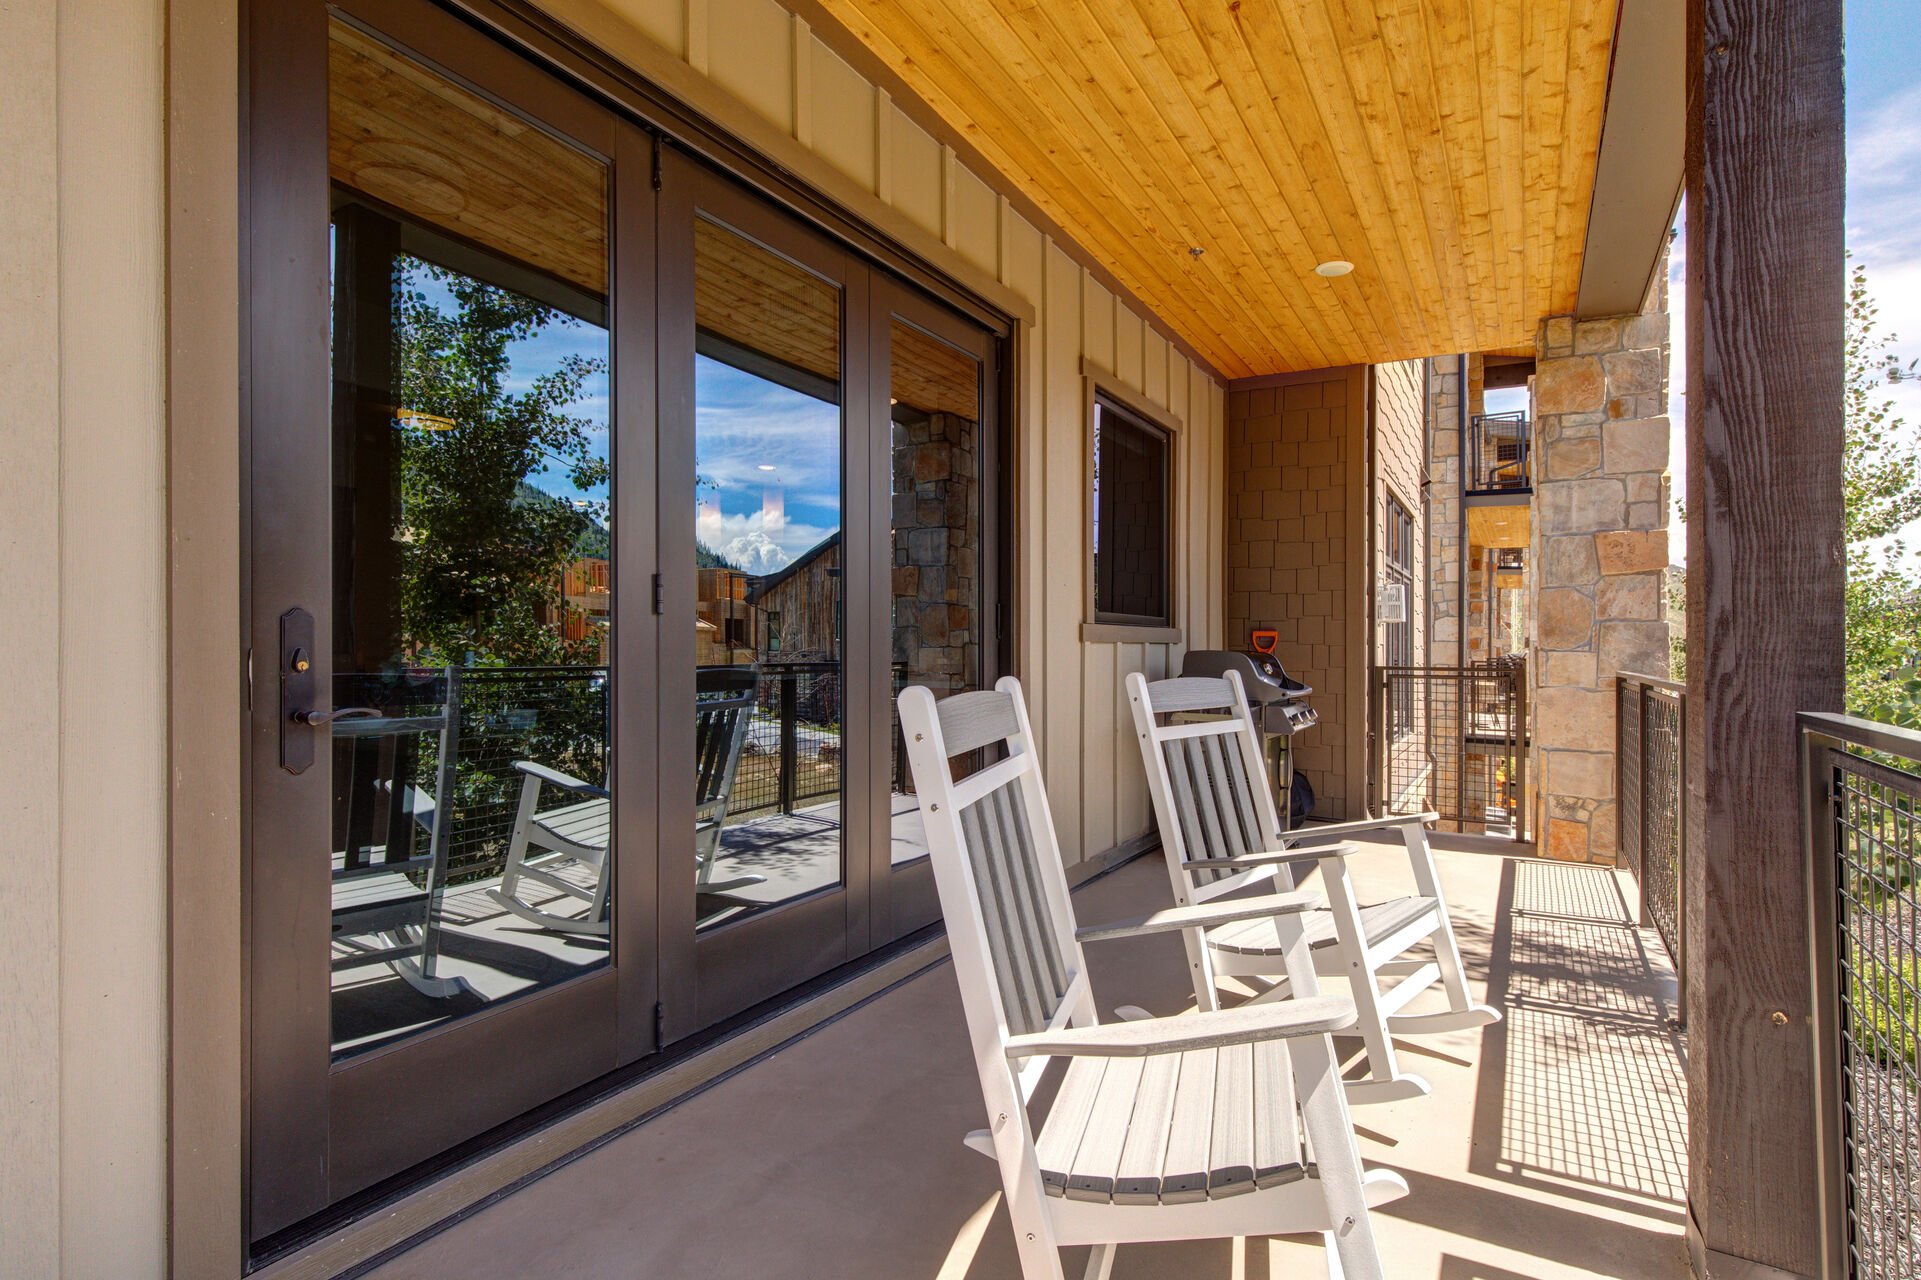 Private, wrap-around deck with BBQ grill, fire pit and breathtaking views